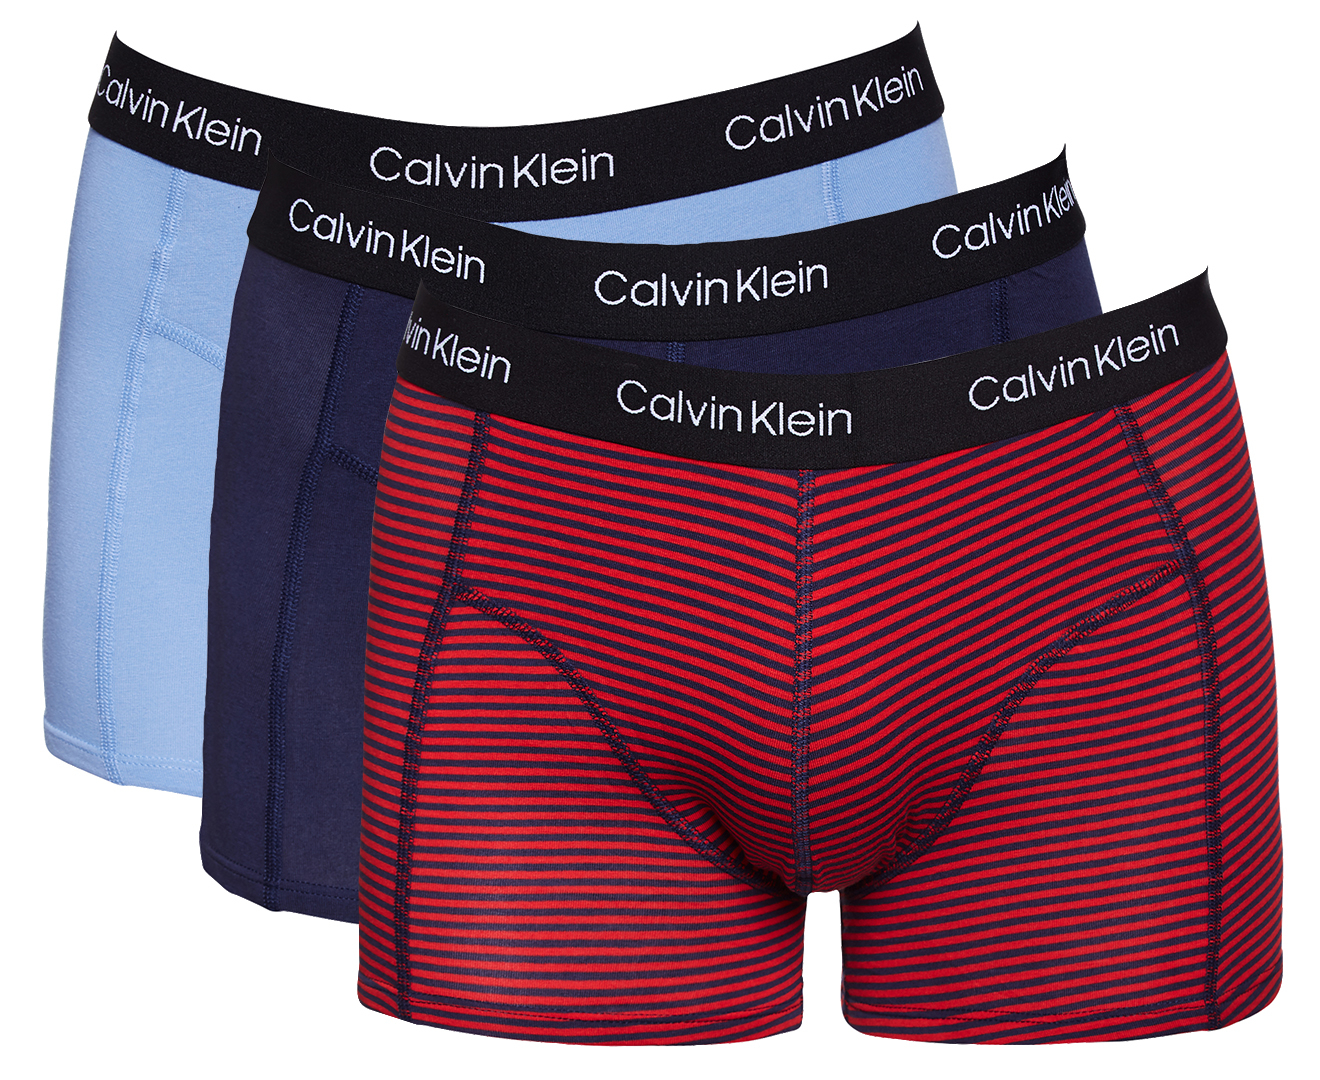 Calvin Klein Men's Axis Cotton Stretch Trunks 3-Pack - Blue/Marching ...